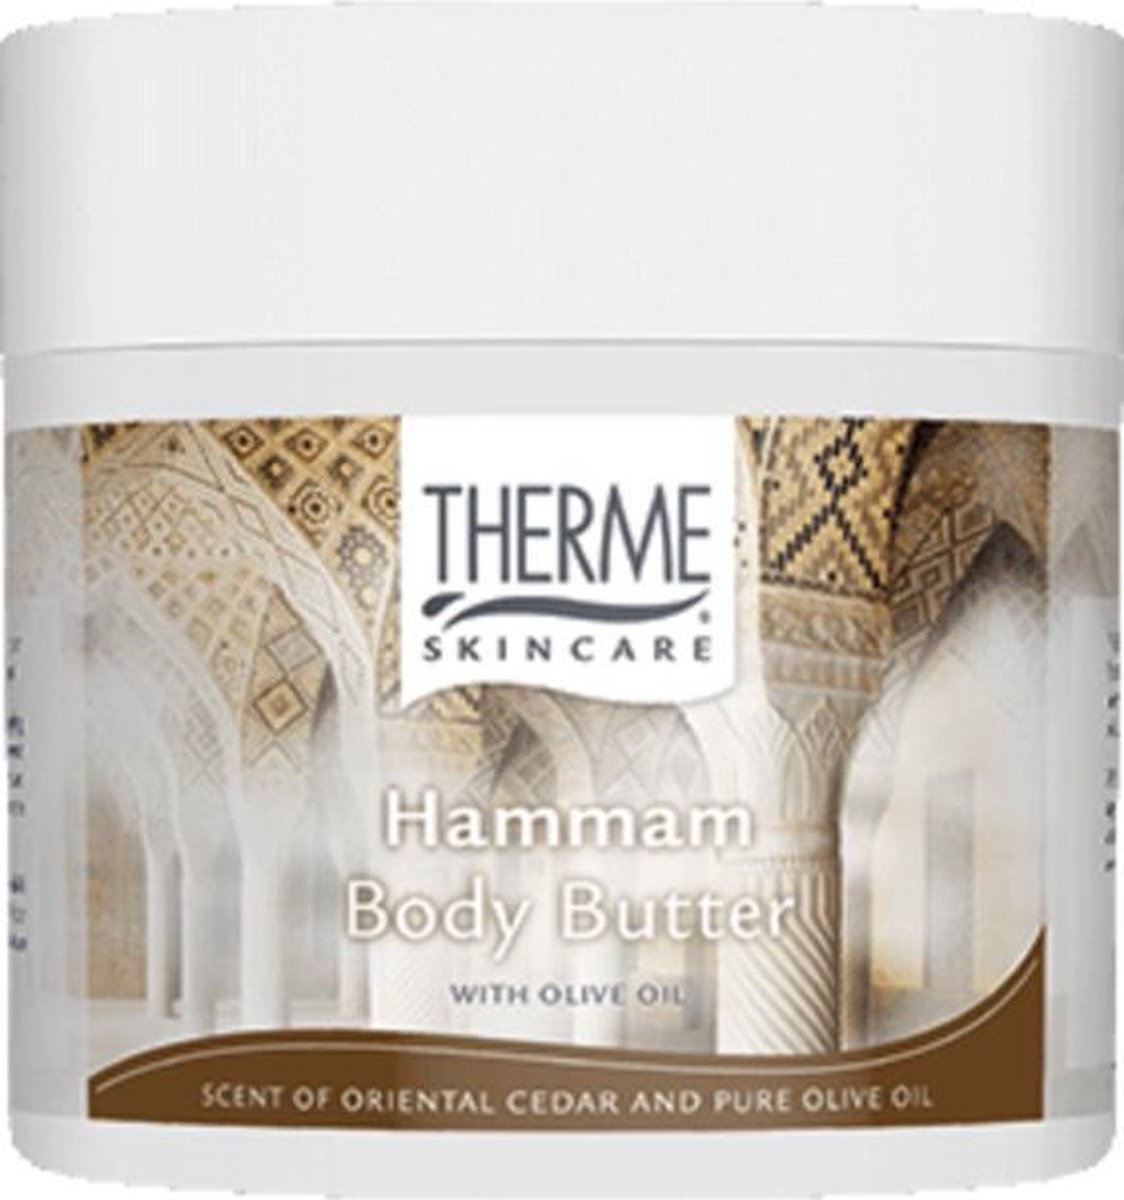 Therme Skincare Hammam Body Butter 250